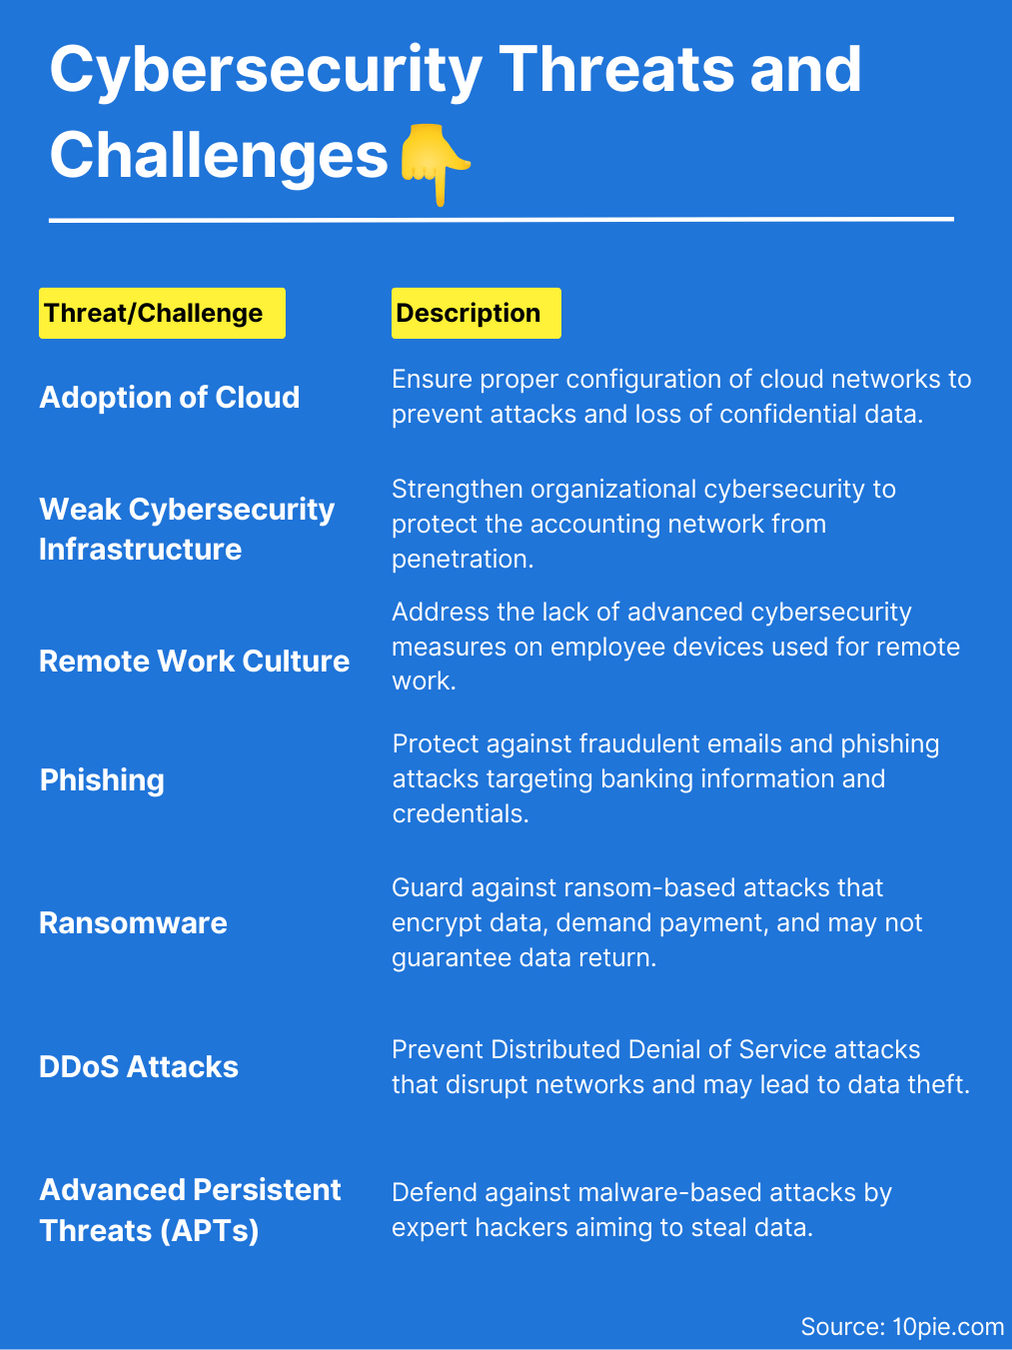 Cybersecurity Threats and Challenges list